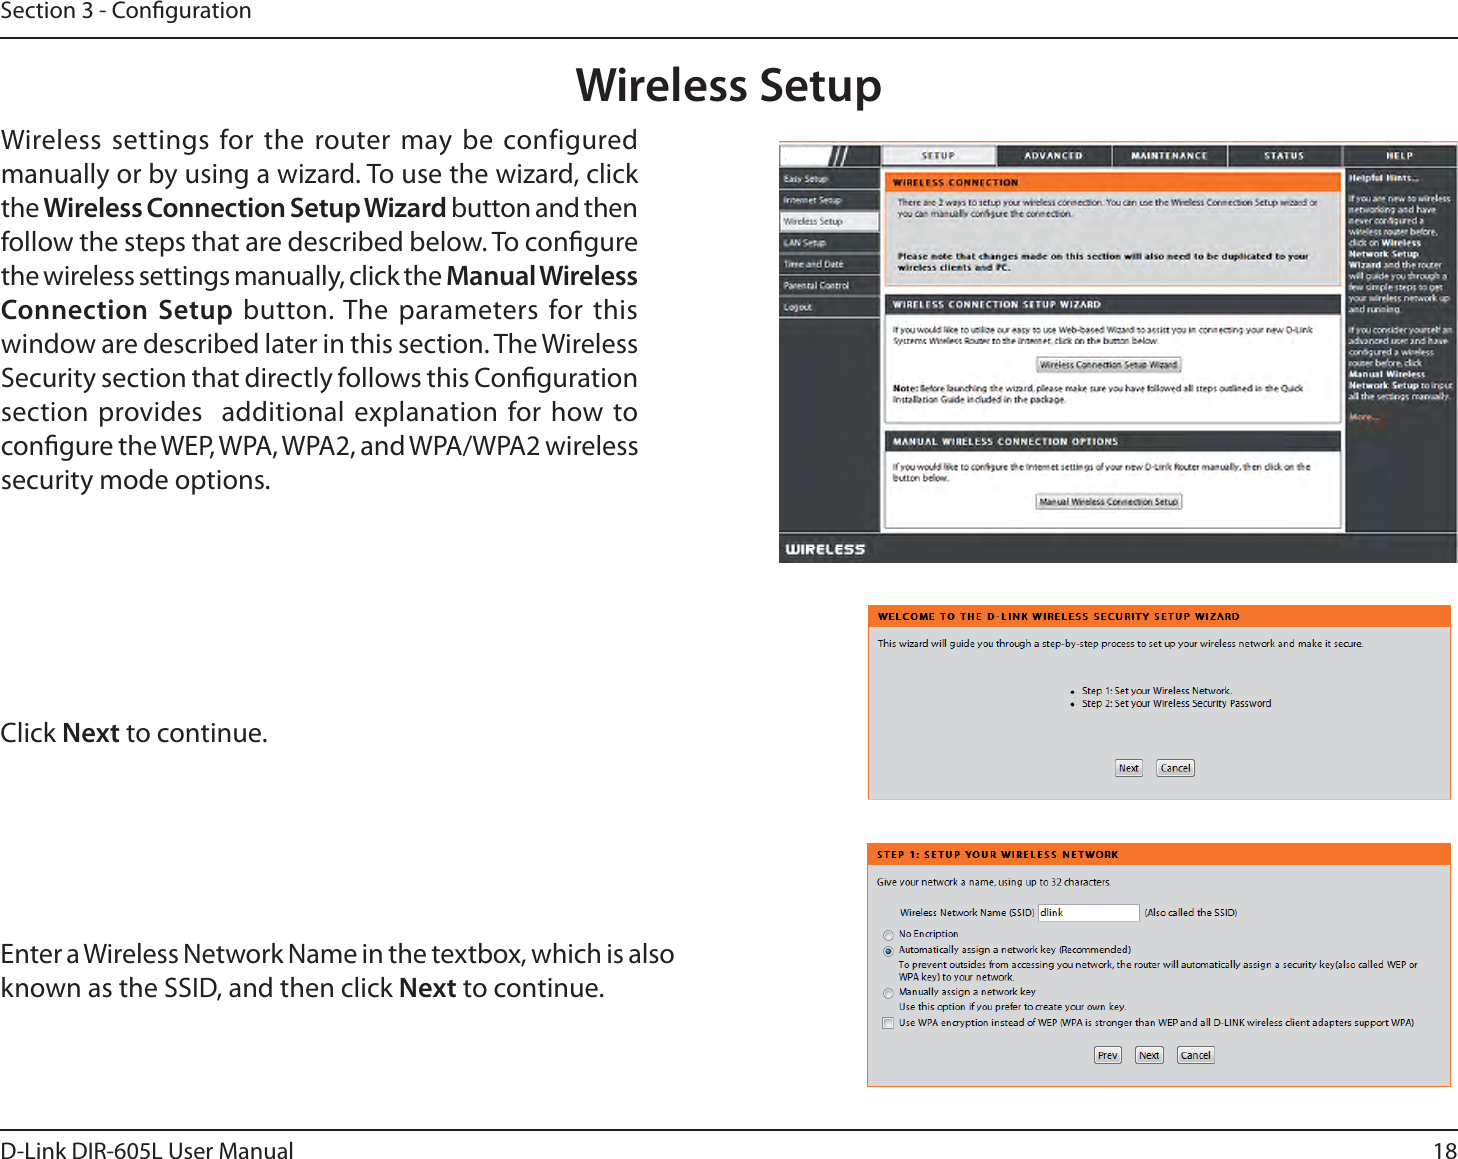 18D-Link DIR-605L User ManualSection 3 - CongurationWireless SetupWireless settings for the router may be configured manually or by using a wizard. To use the wizard, click the 8JSFMFTT$POOFDUJPO4FUVQ8J[BSE button and then follow the steps that are described below. To congure the wireless settings manually, click the Manual Wireless Connection Setup button. The parameters for this window are described later in this section. The Wireless Security section that directly follows this Conguration section provides  additional explanation for how to congure the WEP, WPA, WPA2, and WPA/WPA2 wireless security mode options. Click Next to continue.Enter a Wireless Network Name in the textbox, which is also known as the SSID, and then click Next to continue.DIR-605L